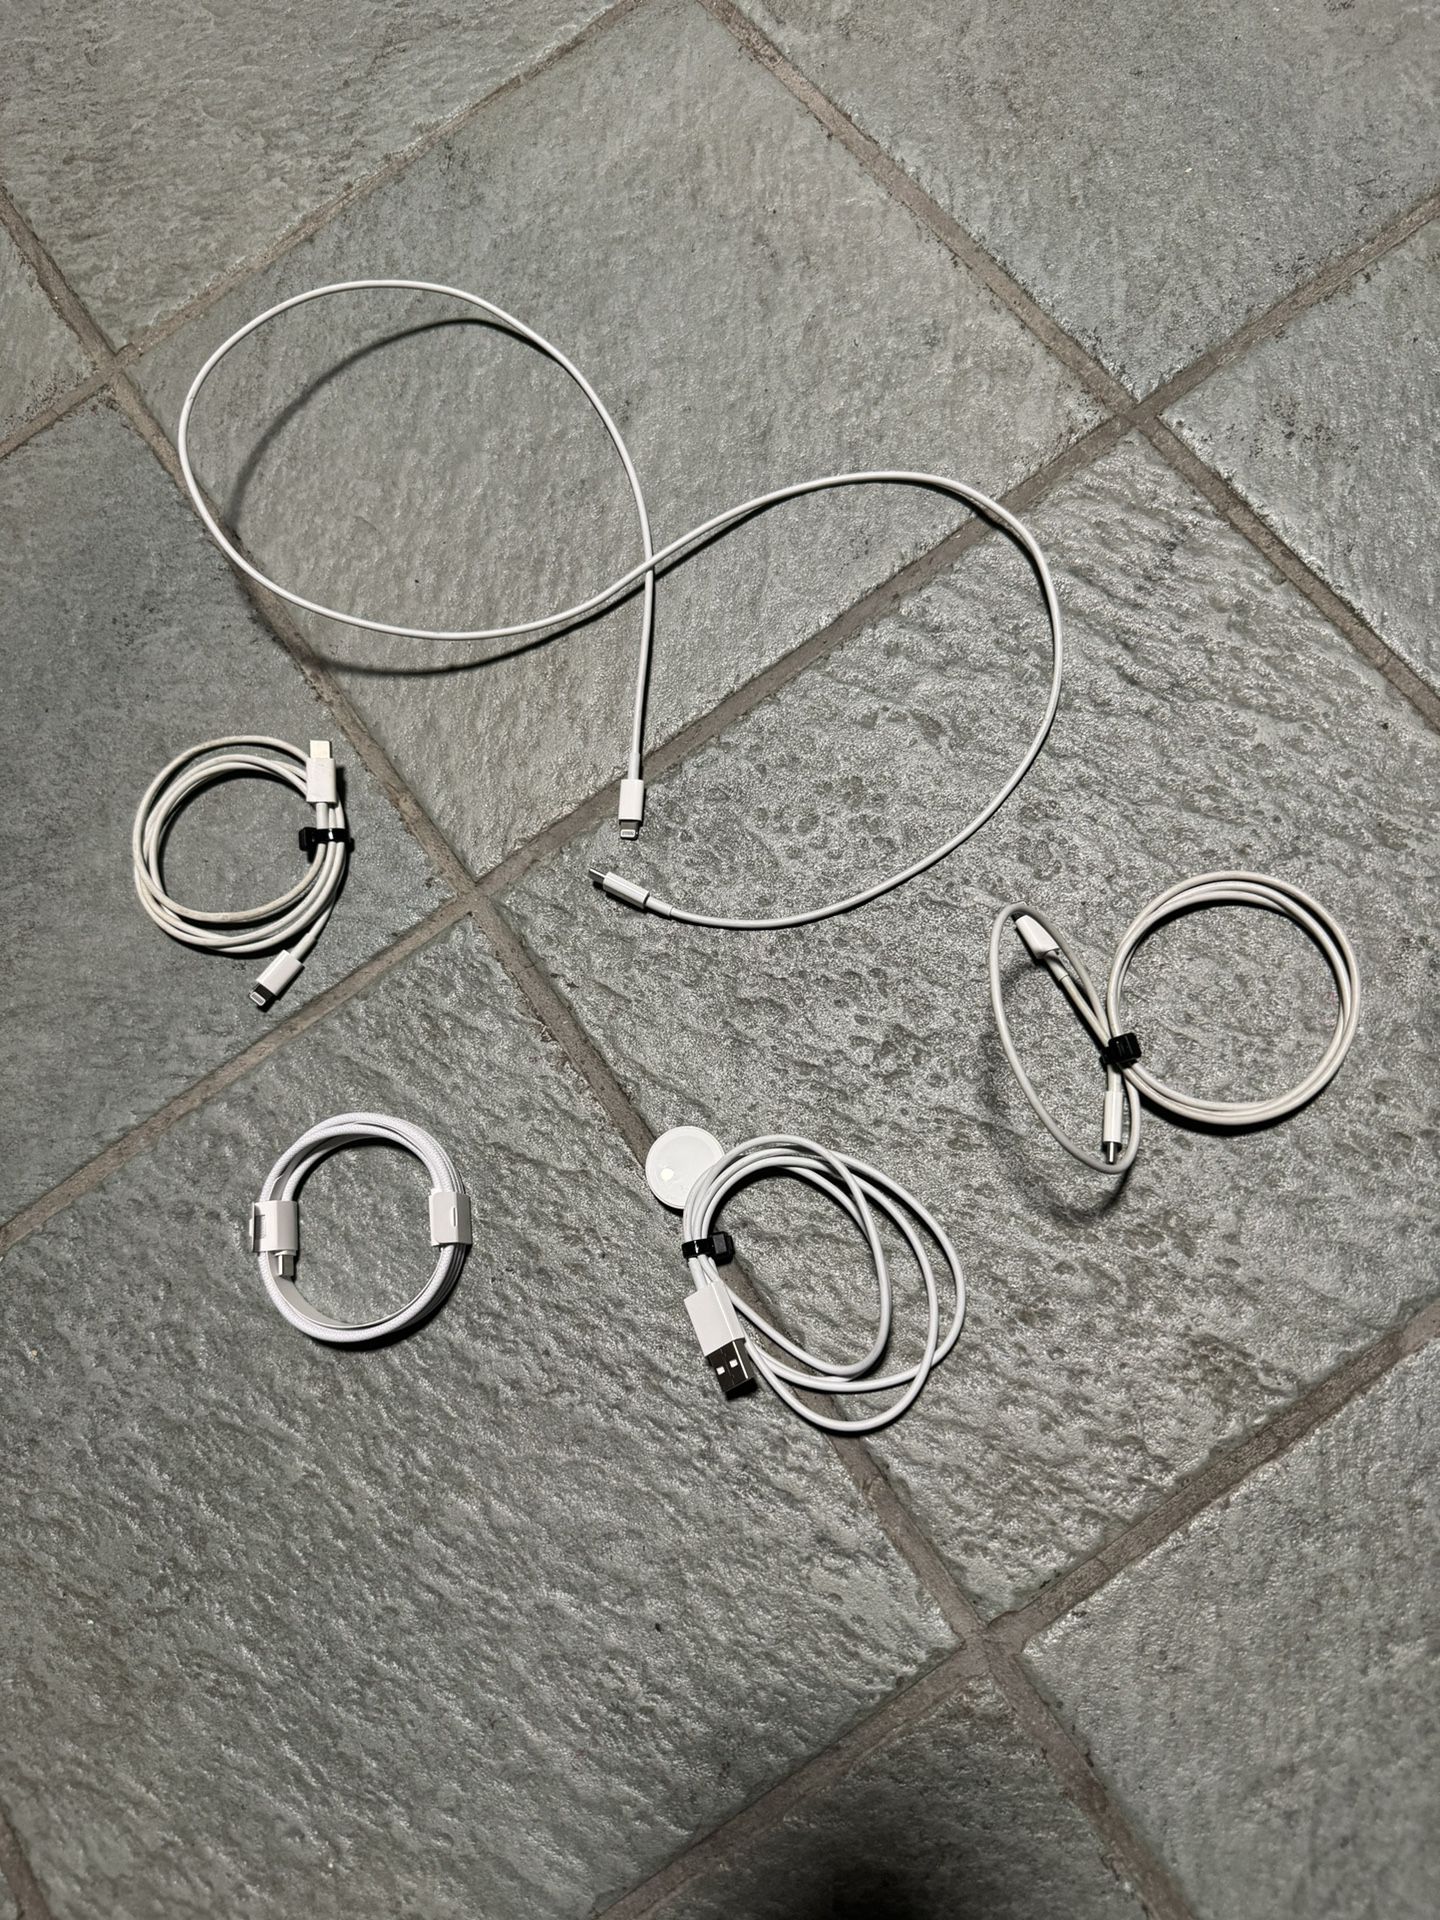 Apple iPhone Cables - 5 Total